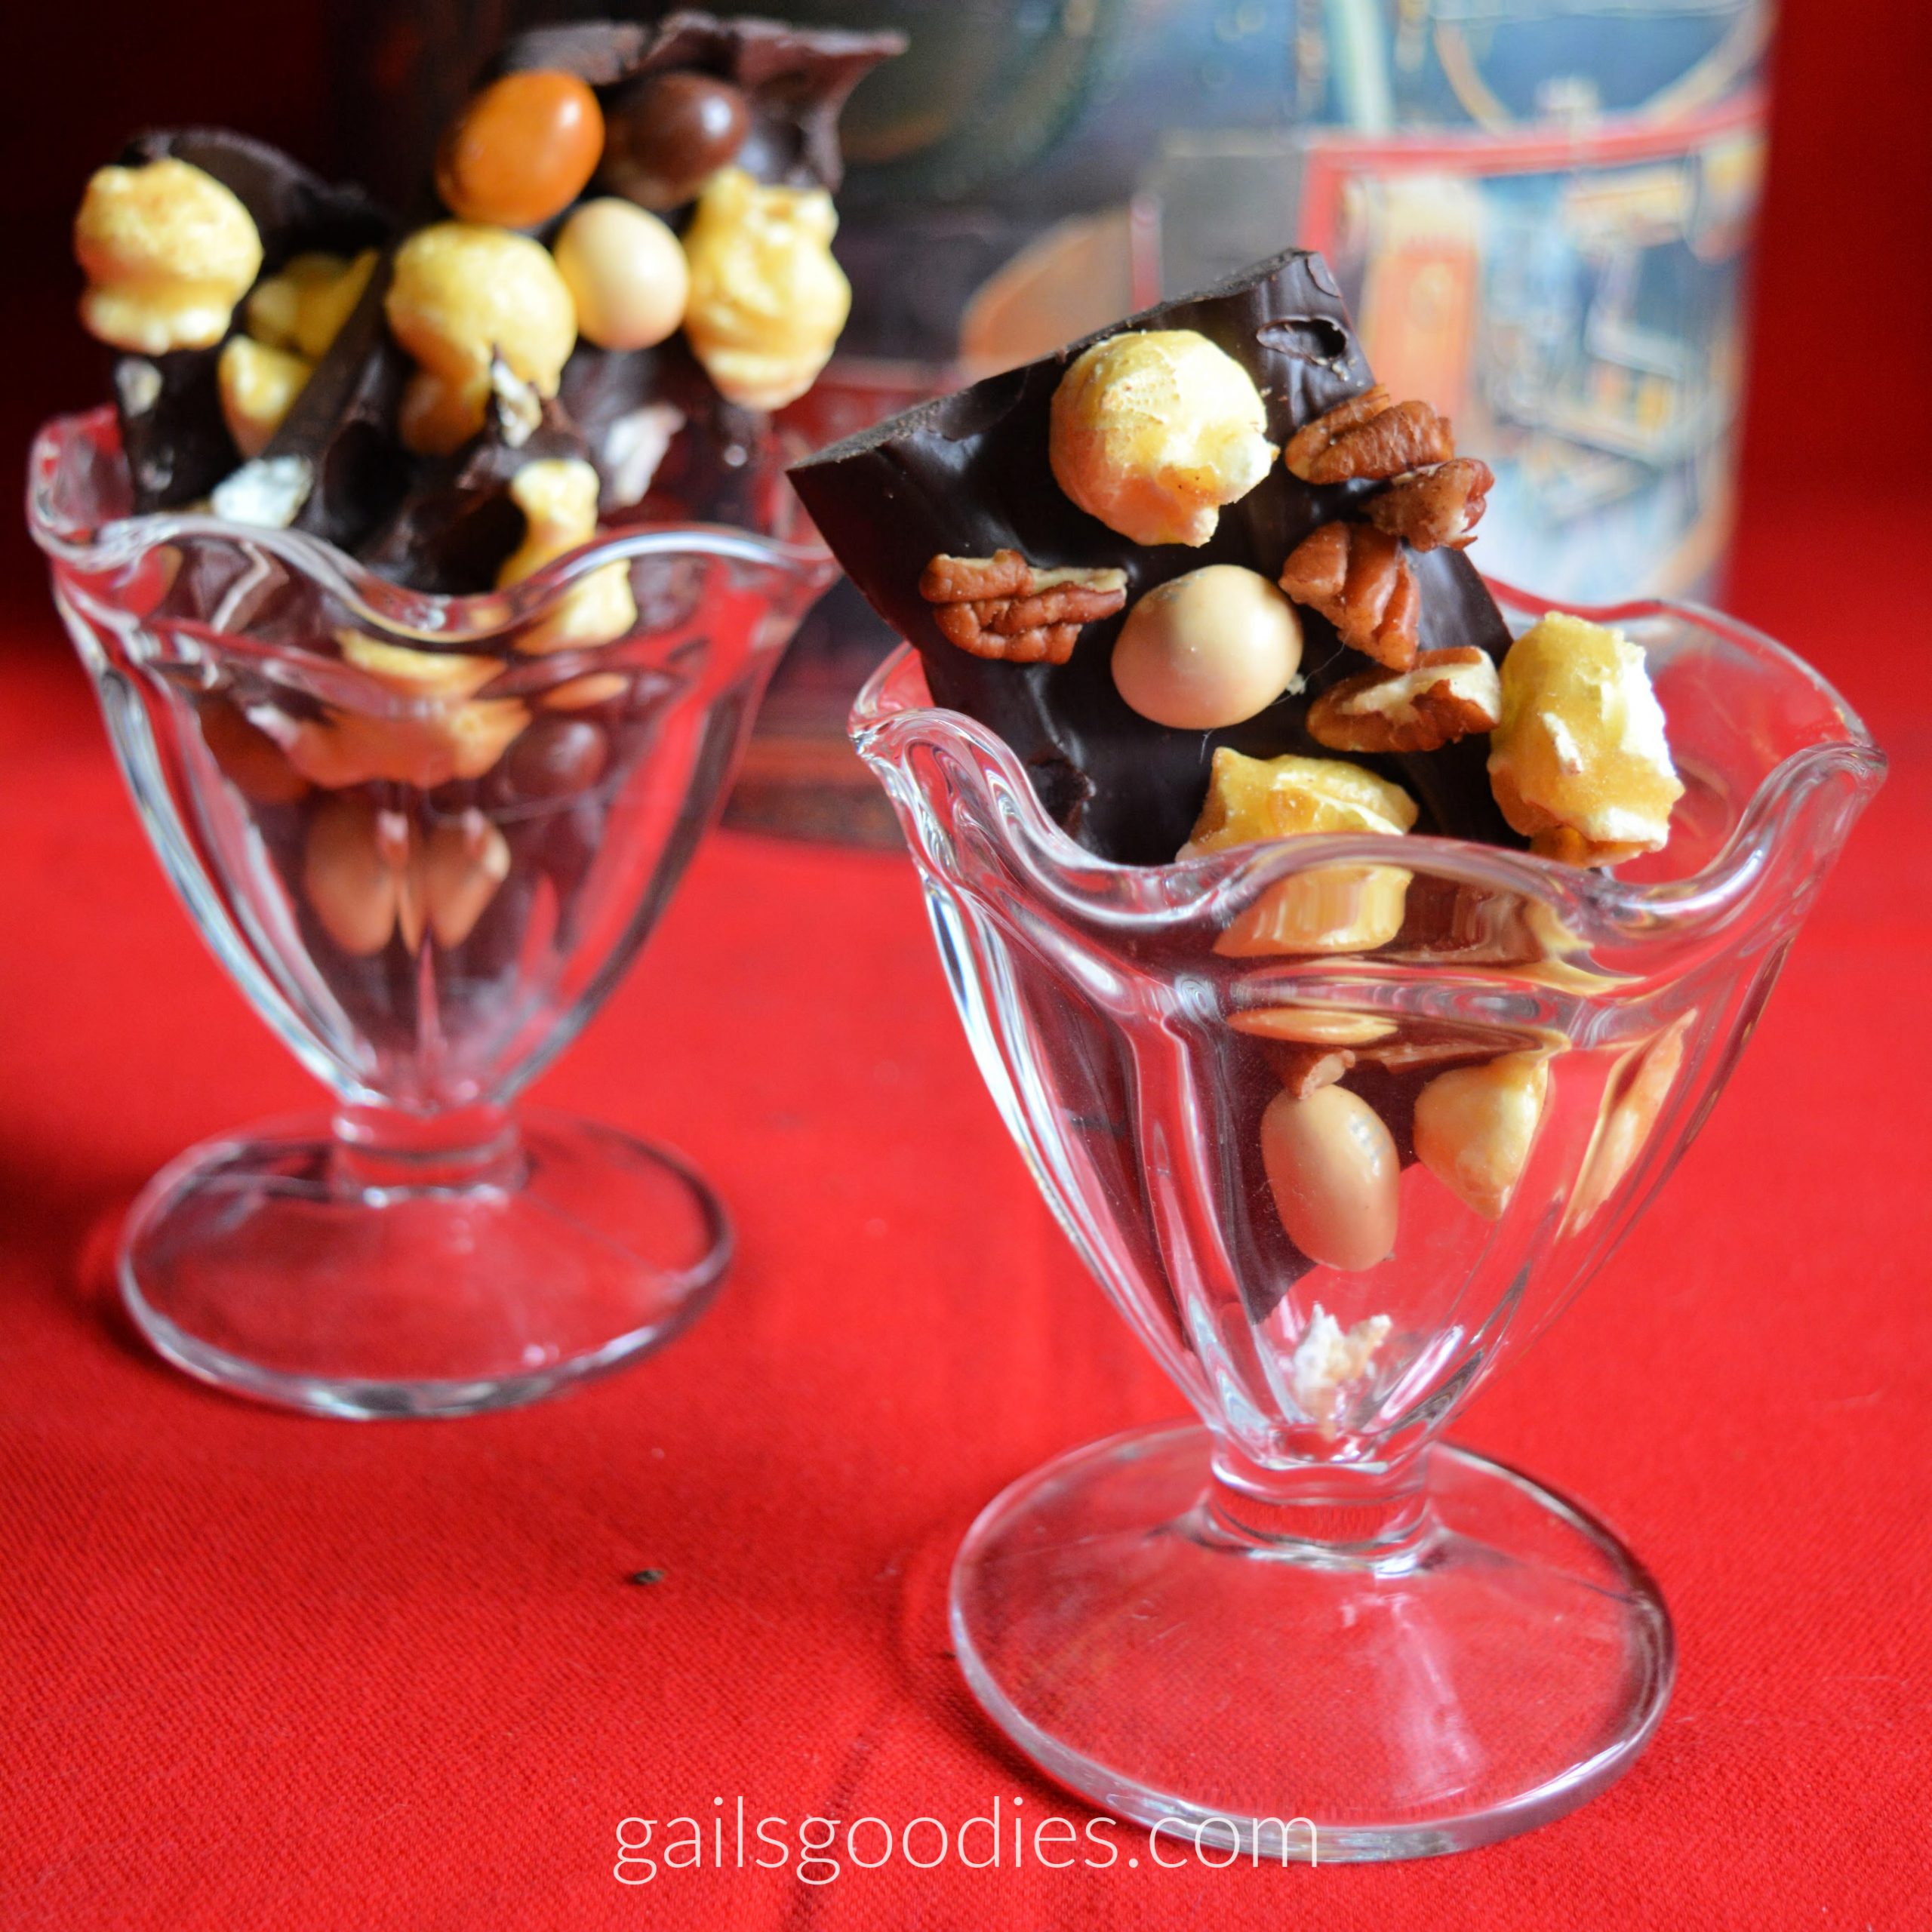 Two glass sundae bowls hold pieces of mocha caramel popcorn bark. The dark chocolate bark pieces are irregular shapes and are dotted with pieces of golden caramel corn, medium and pale brown m&Ms and pecans. The glasses sit on a red tablecloth and there is a decorative tin in the background.